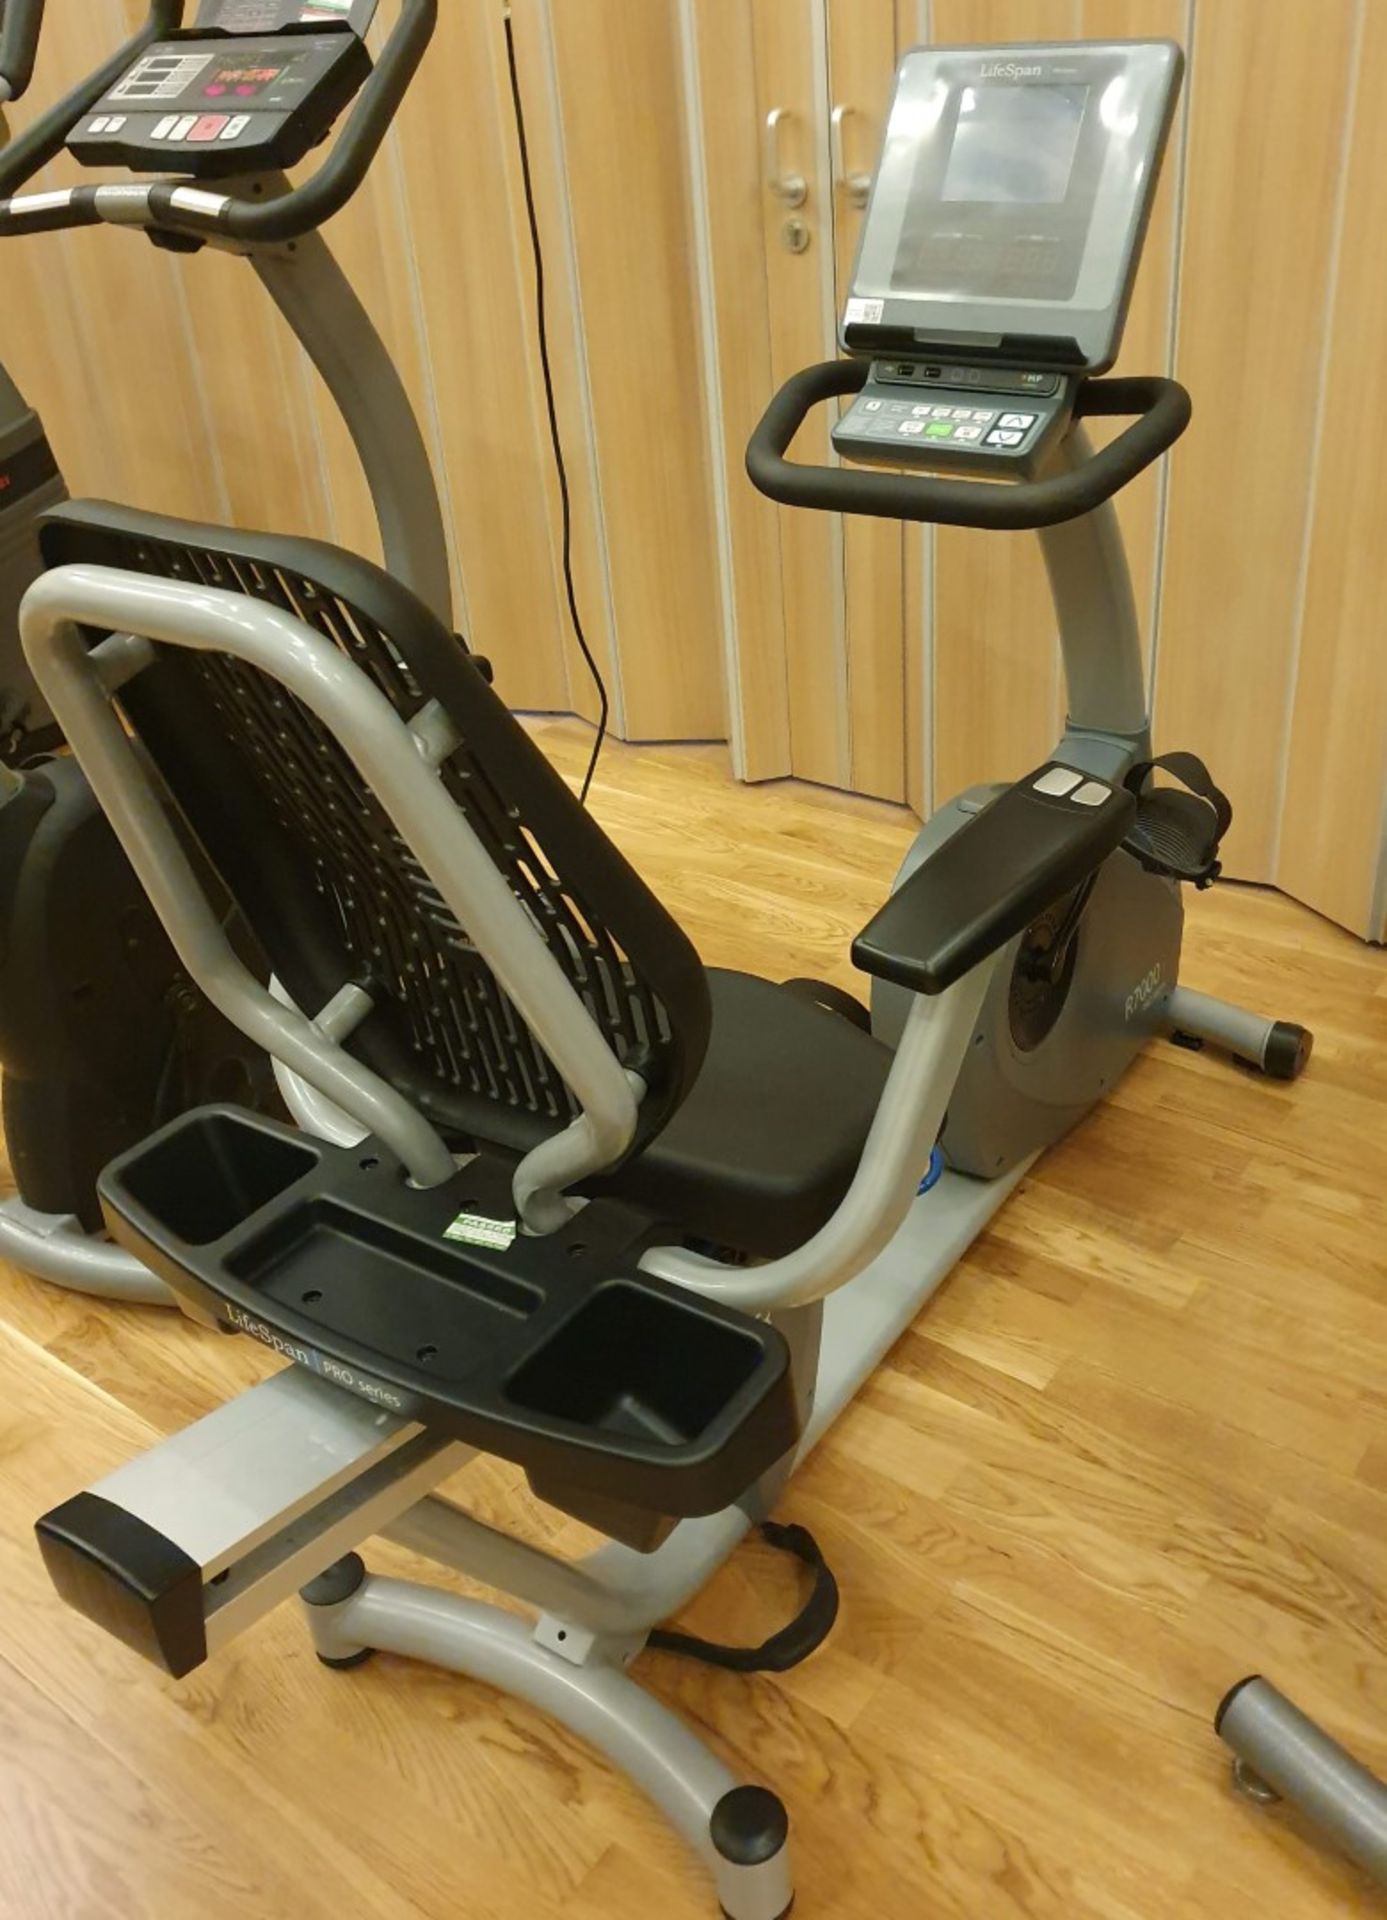 1 x Lifespan R7000 Pro Series Excercise Bike With USB Connectivity - Approx RRP £1,500 - CL552 - - Image 2 of 6